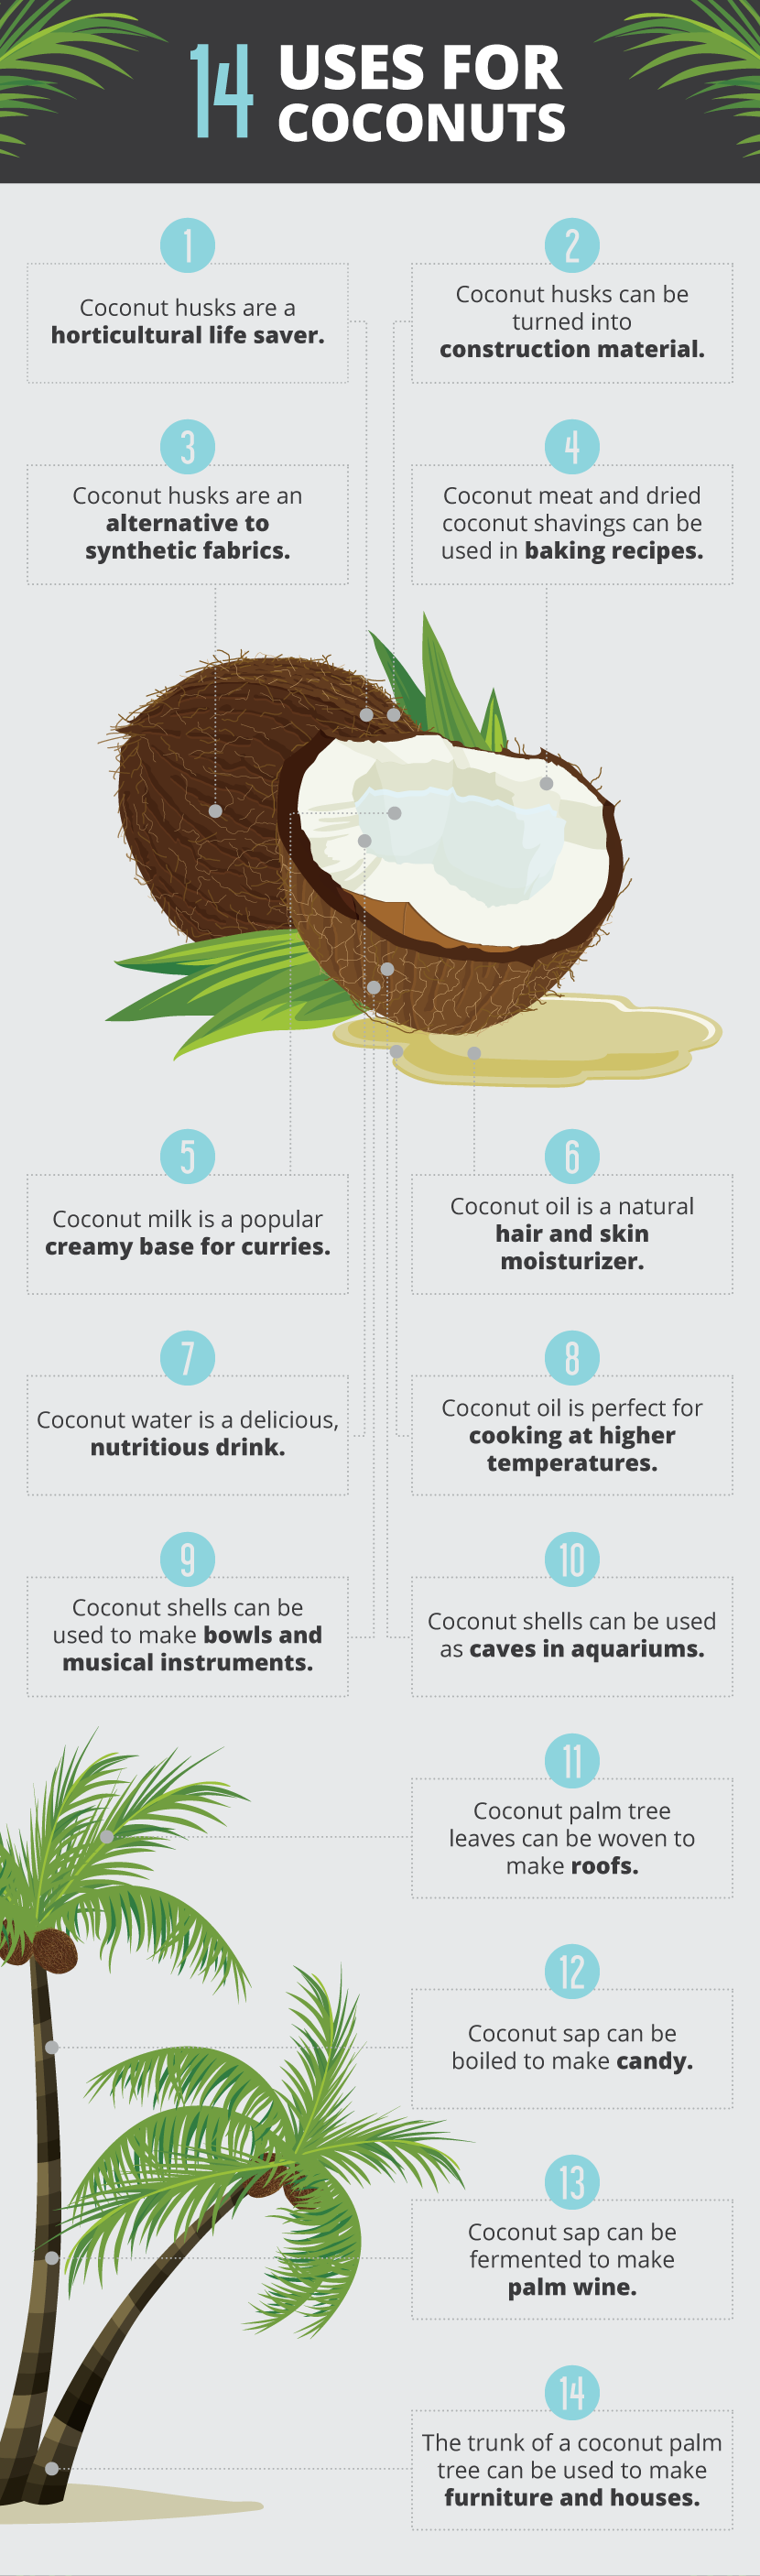 Uses For Coconuts - Unique Ways to Incorporate Coconuts Into Your Life